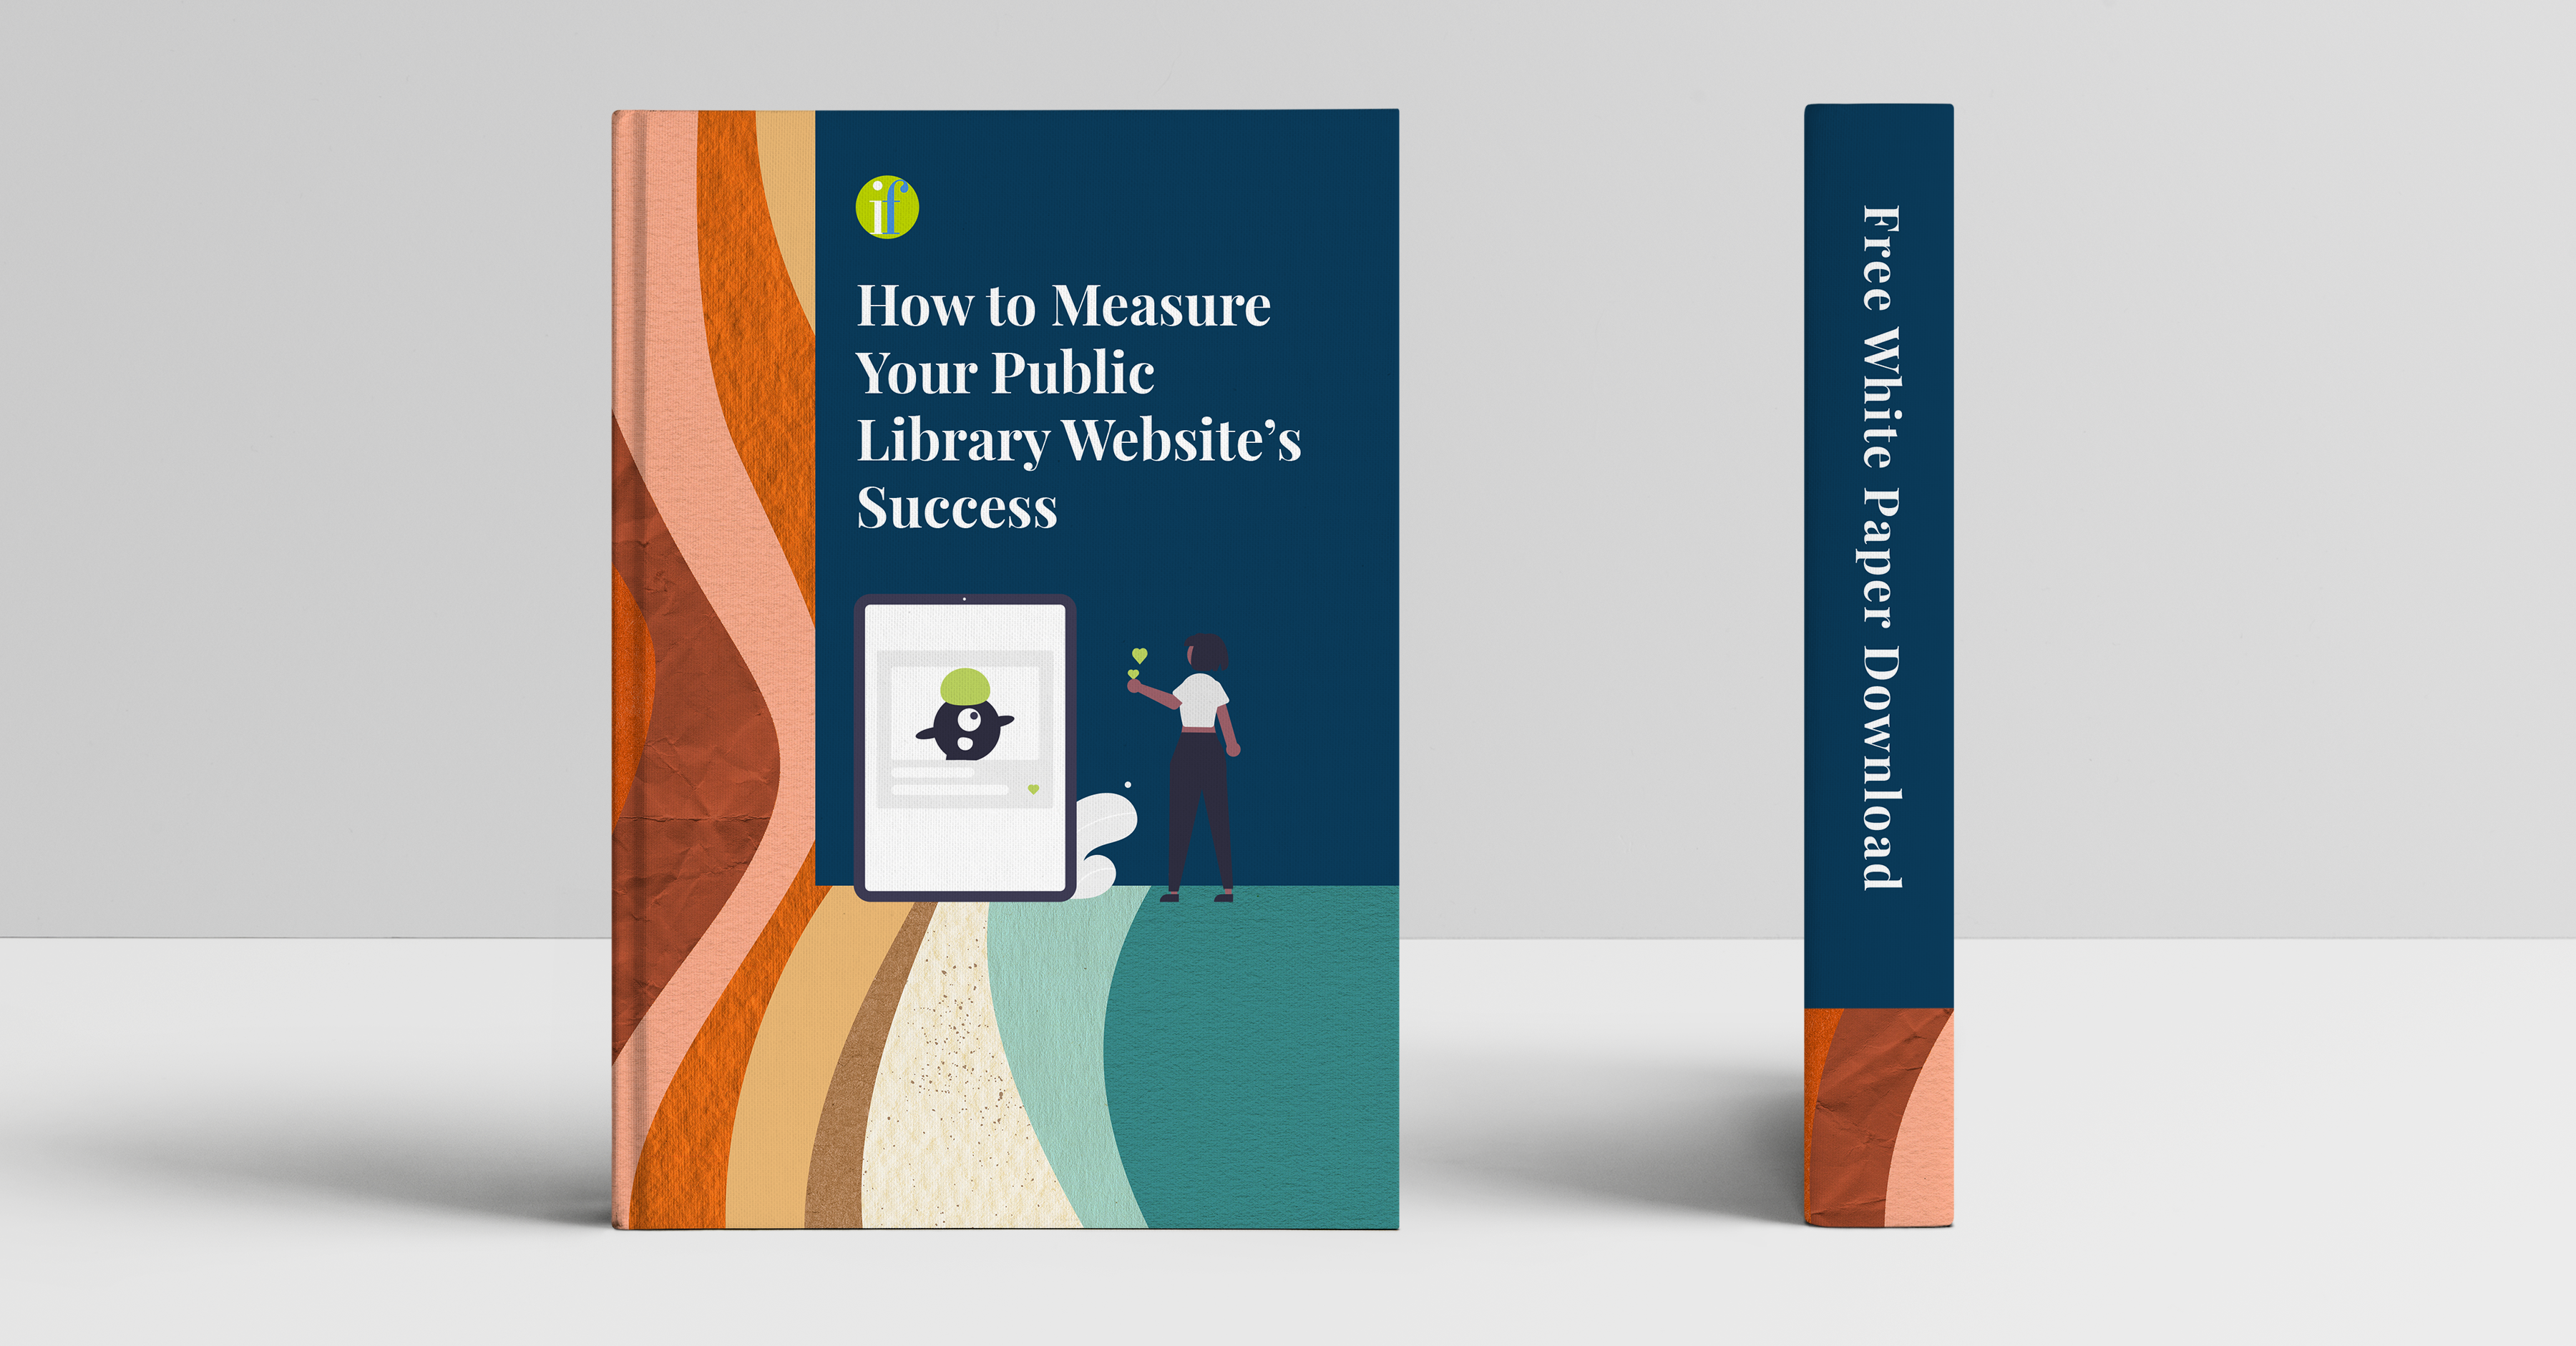 Book Cover and Spine that Reads "How to Measure your Public Library Website's Success, Free White Paper Download"